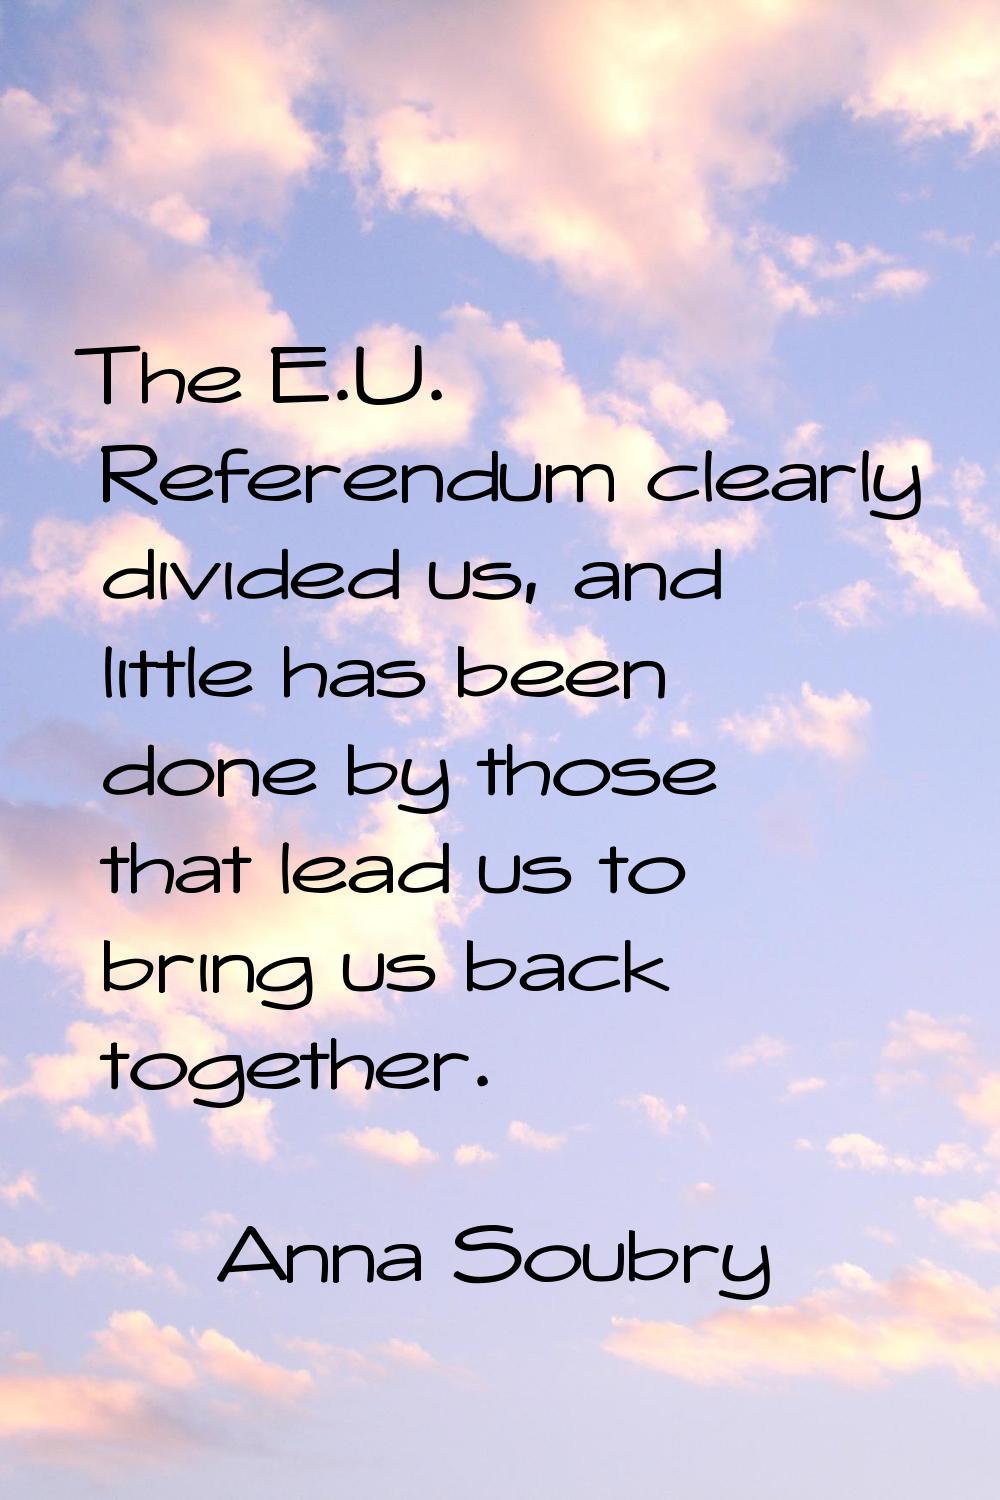 The E.U. Referendum clearly divided us, and little has been done by those that lead us to bring us 